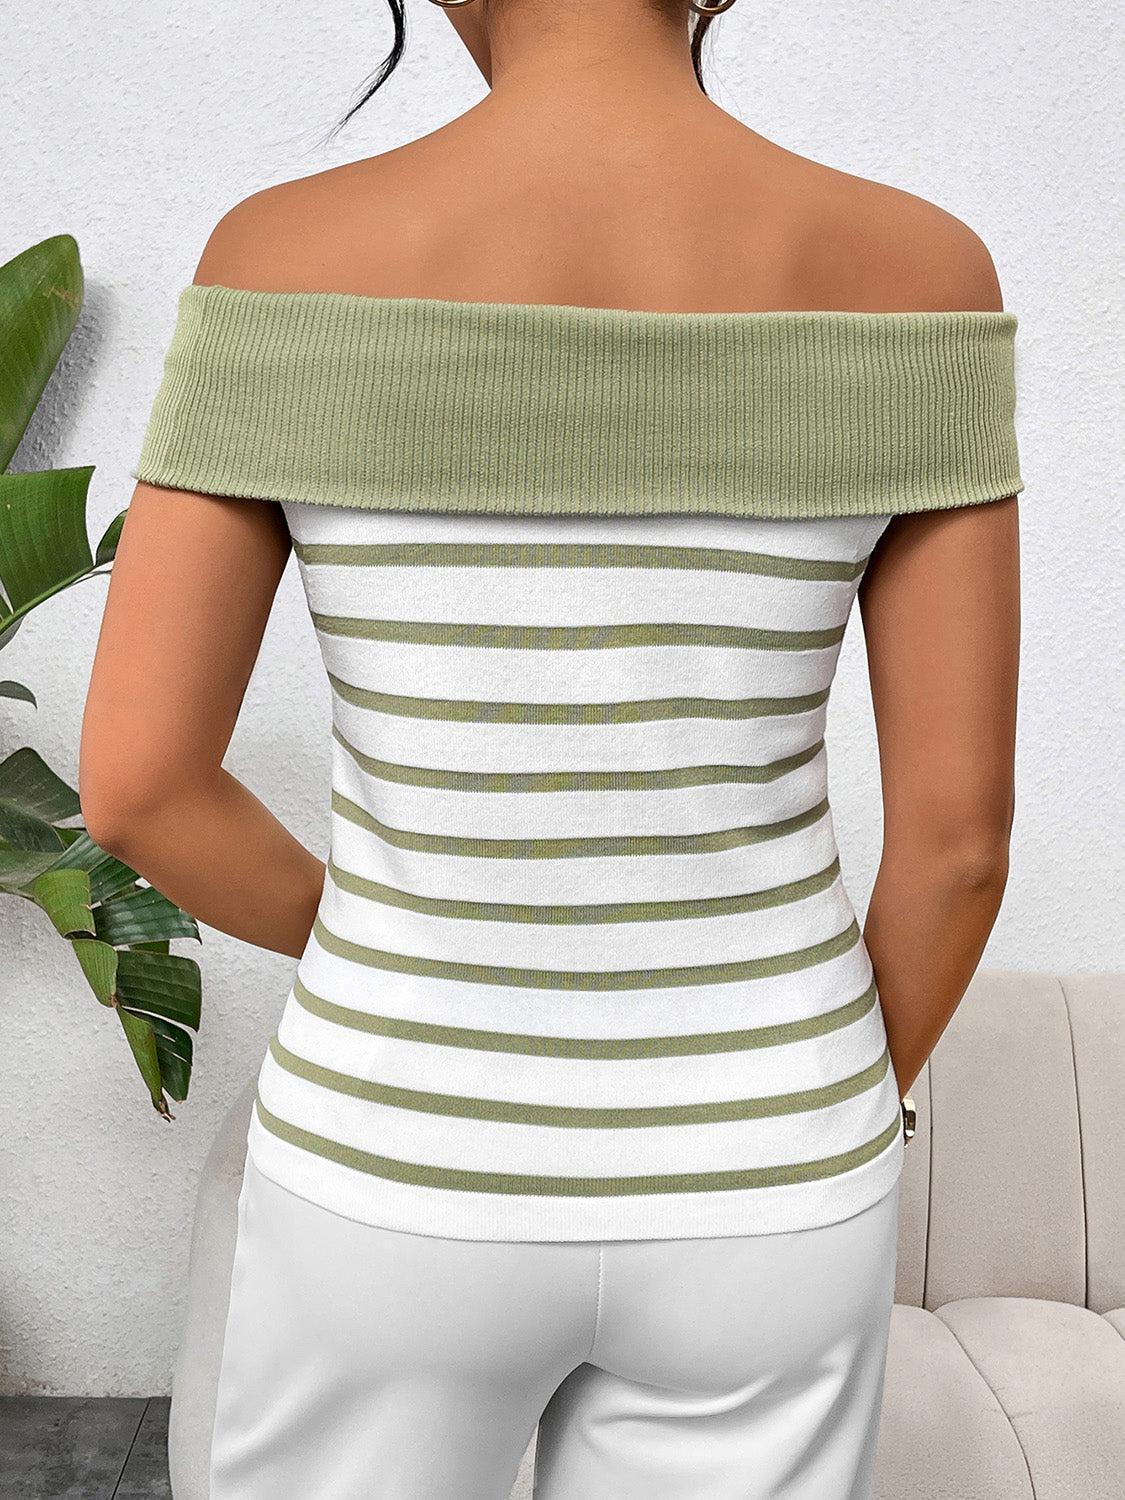 a woman wearing a white and green striped top